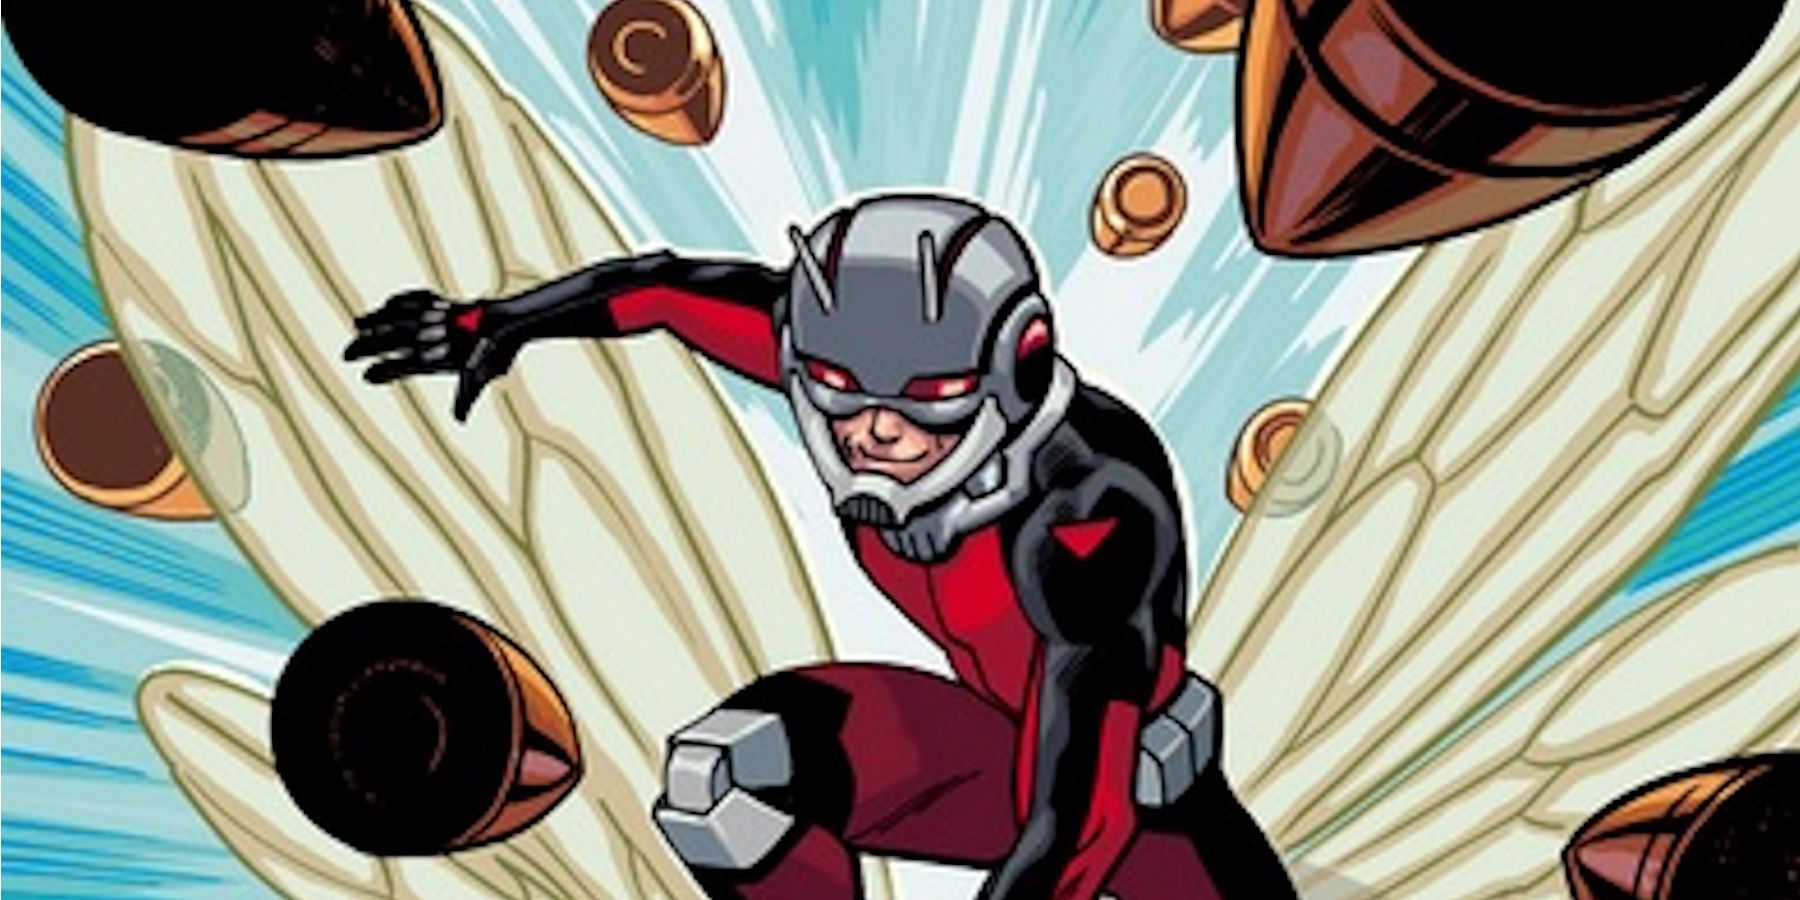 Scott Lang shrinks down to a smaller size in Marvel Comics.